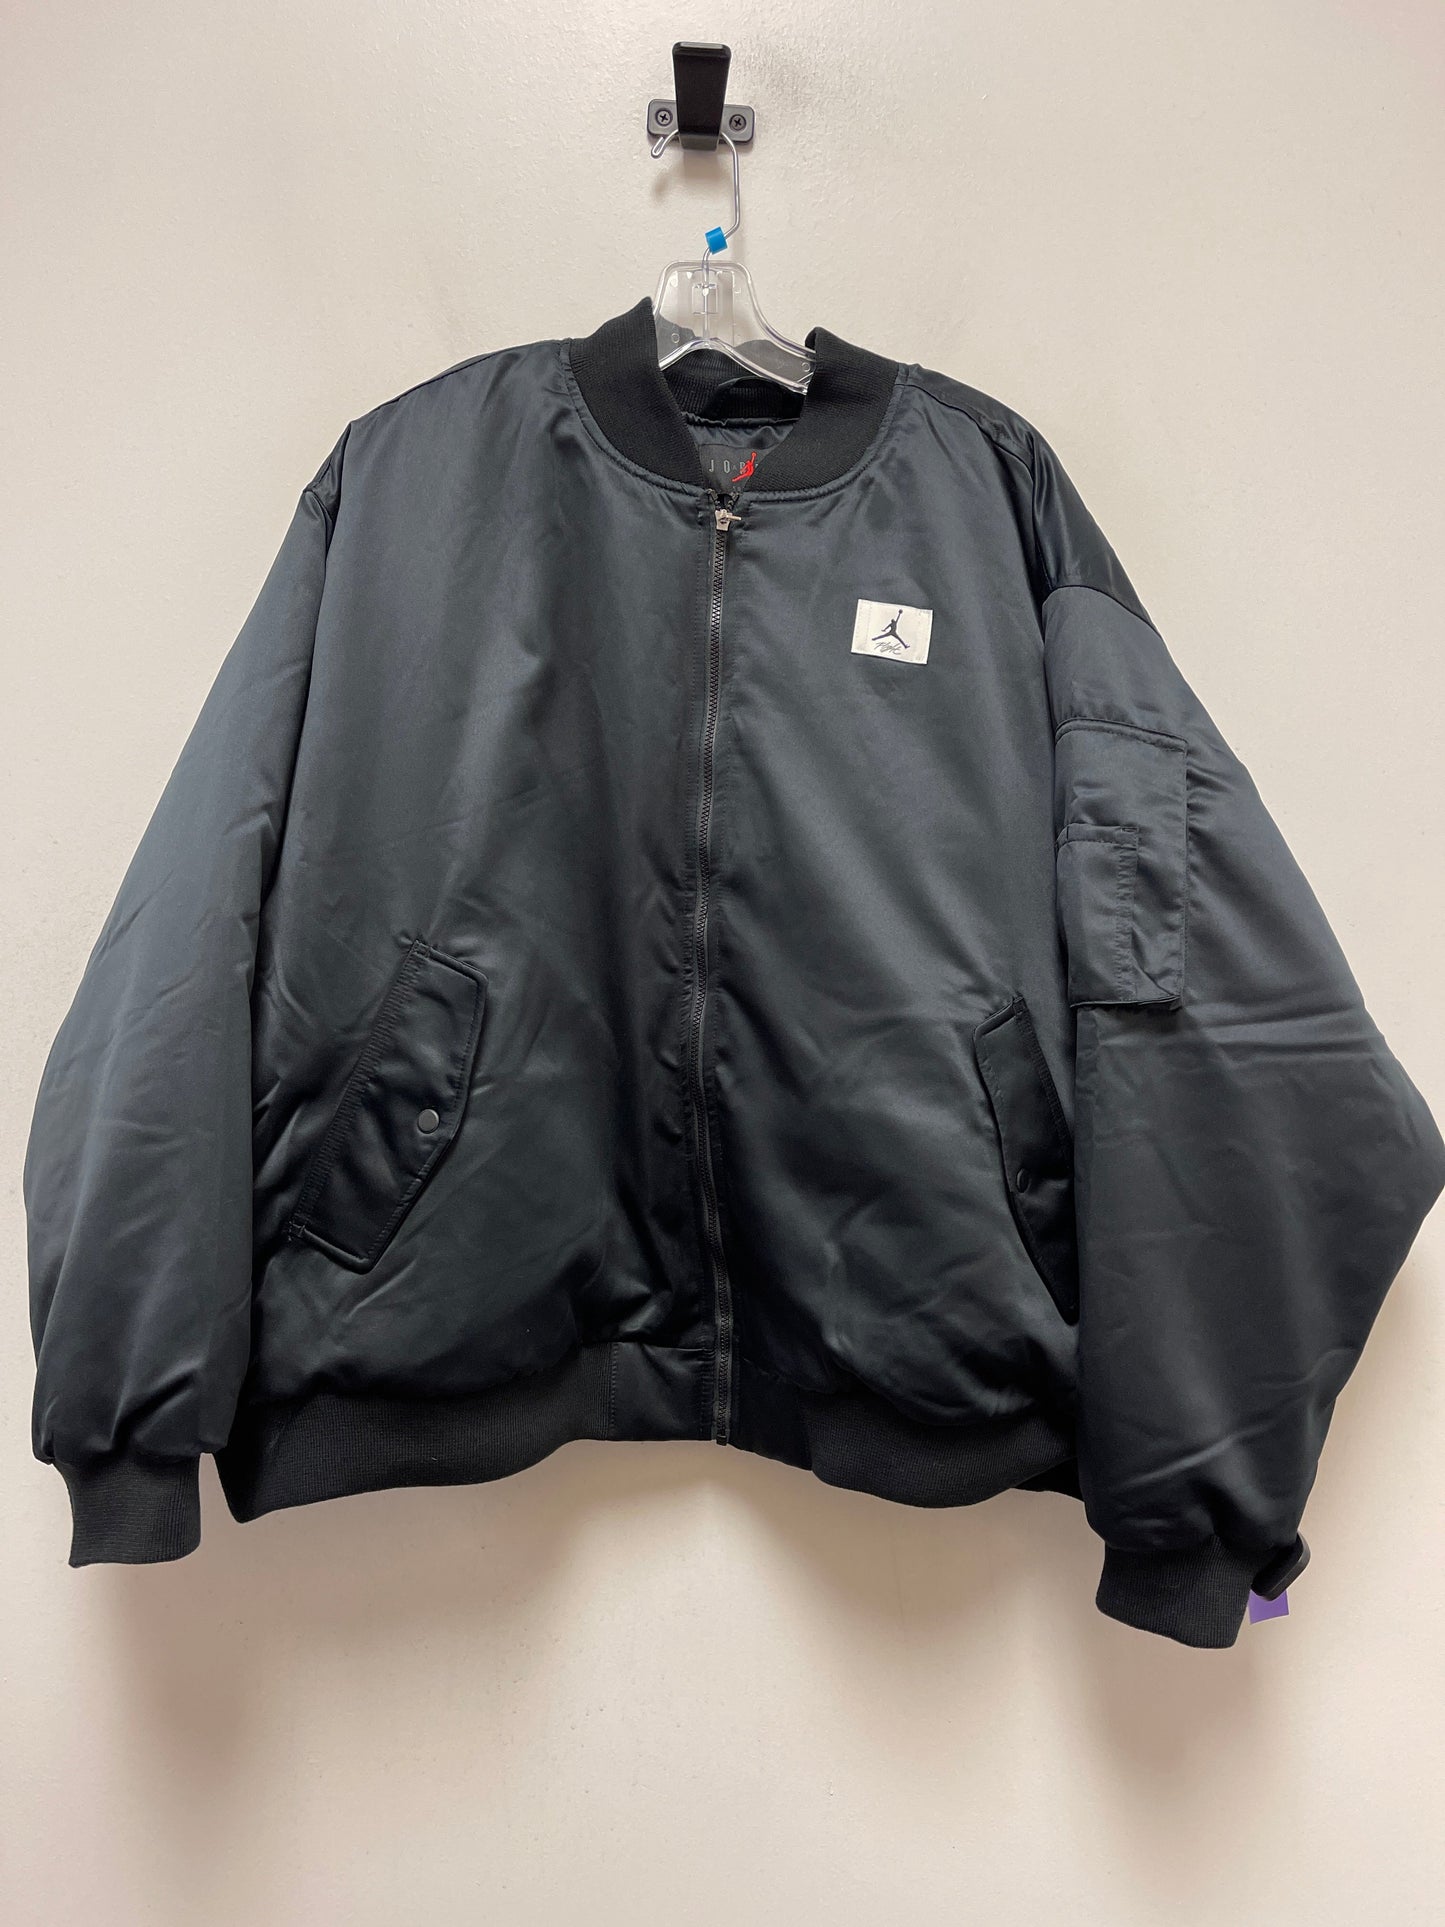 Black Jacket Puffer & Quilted Nike Apparel, Size 1x